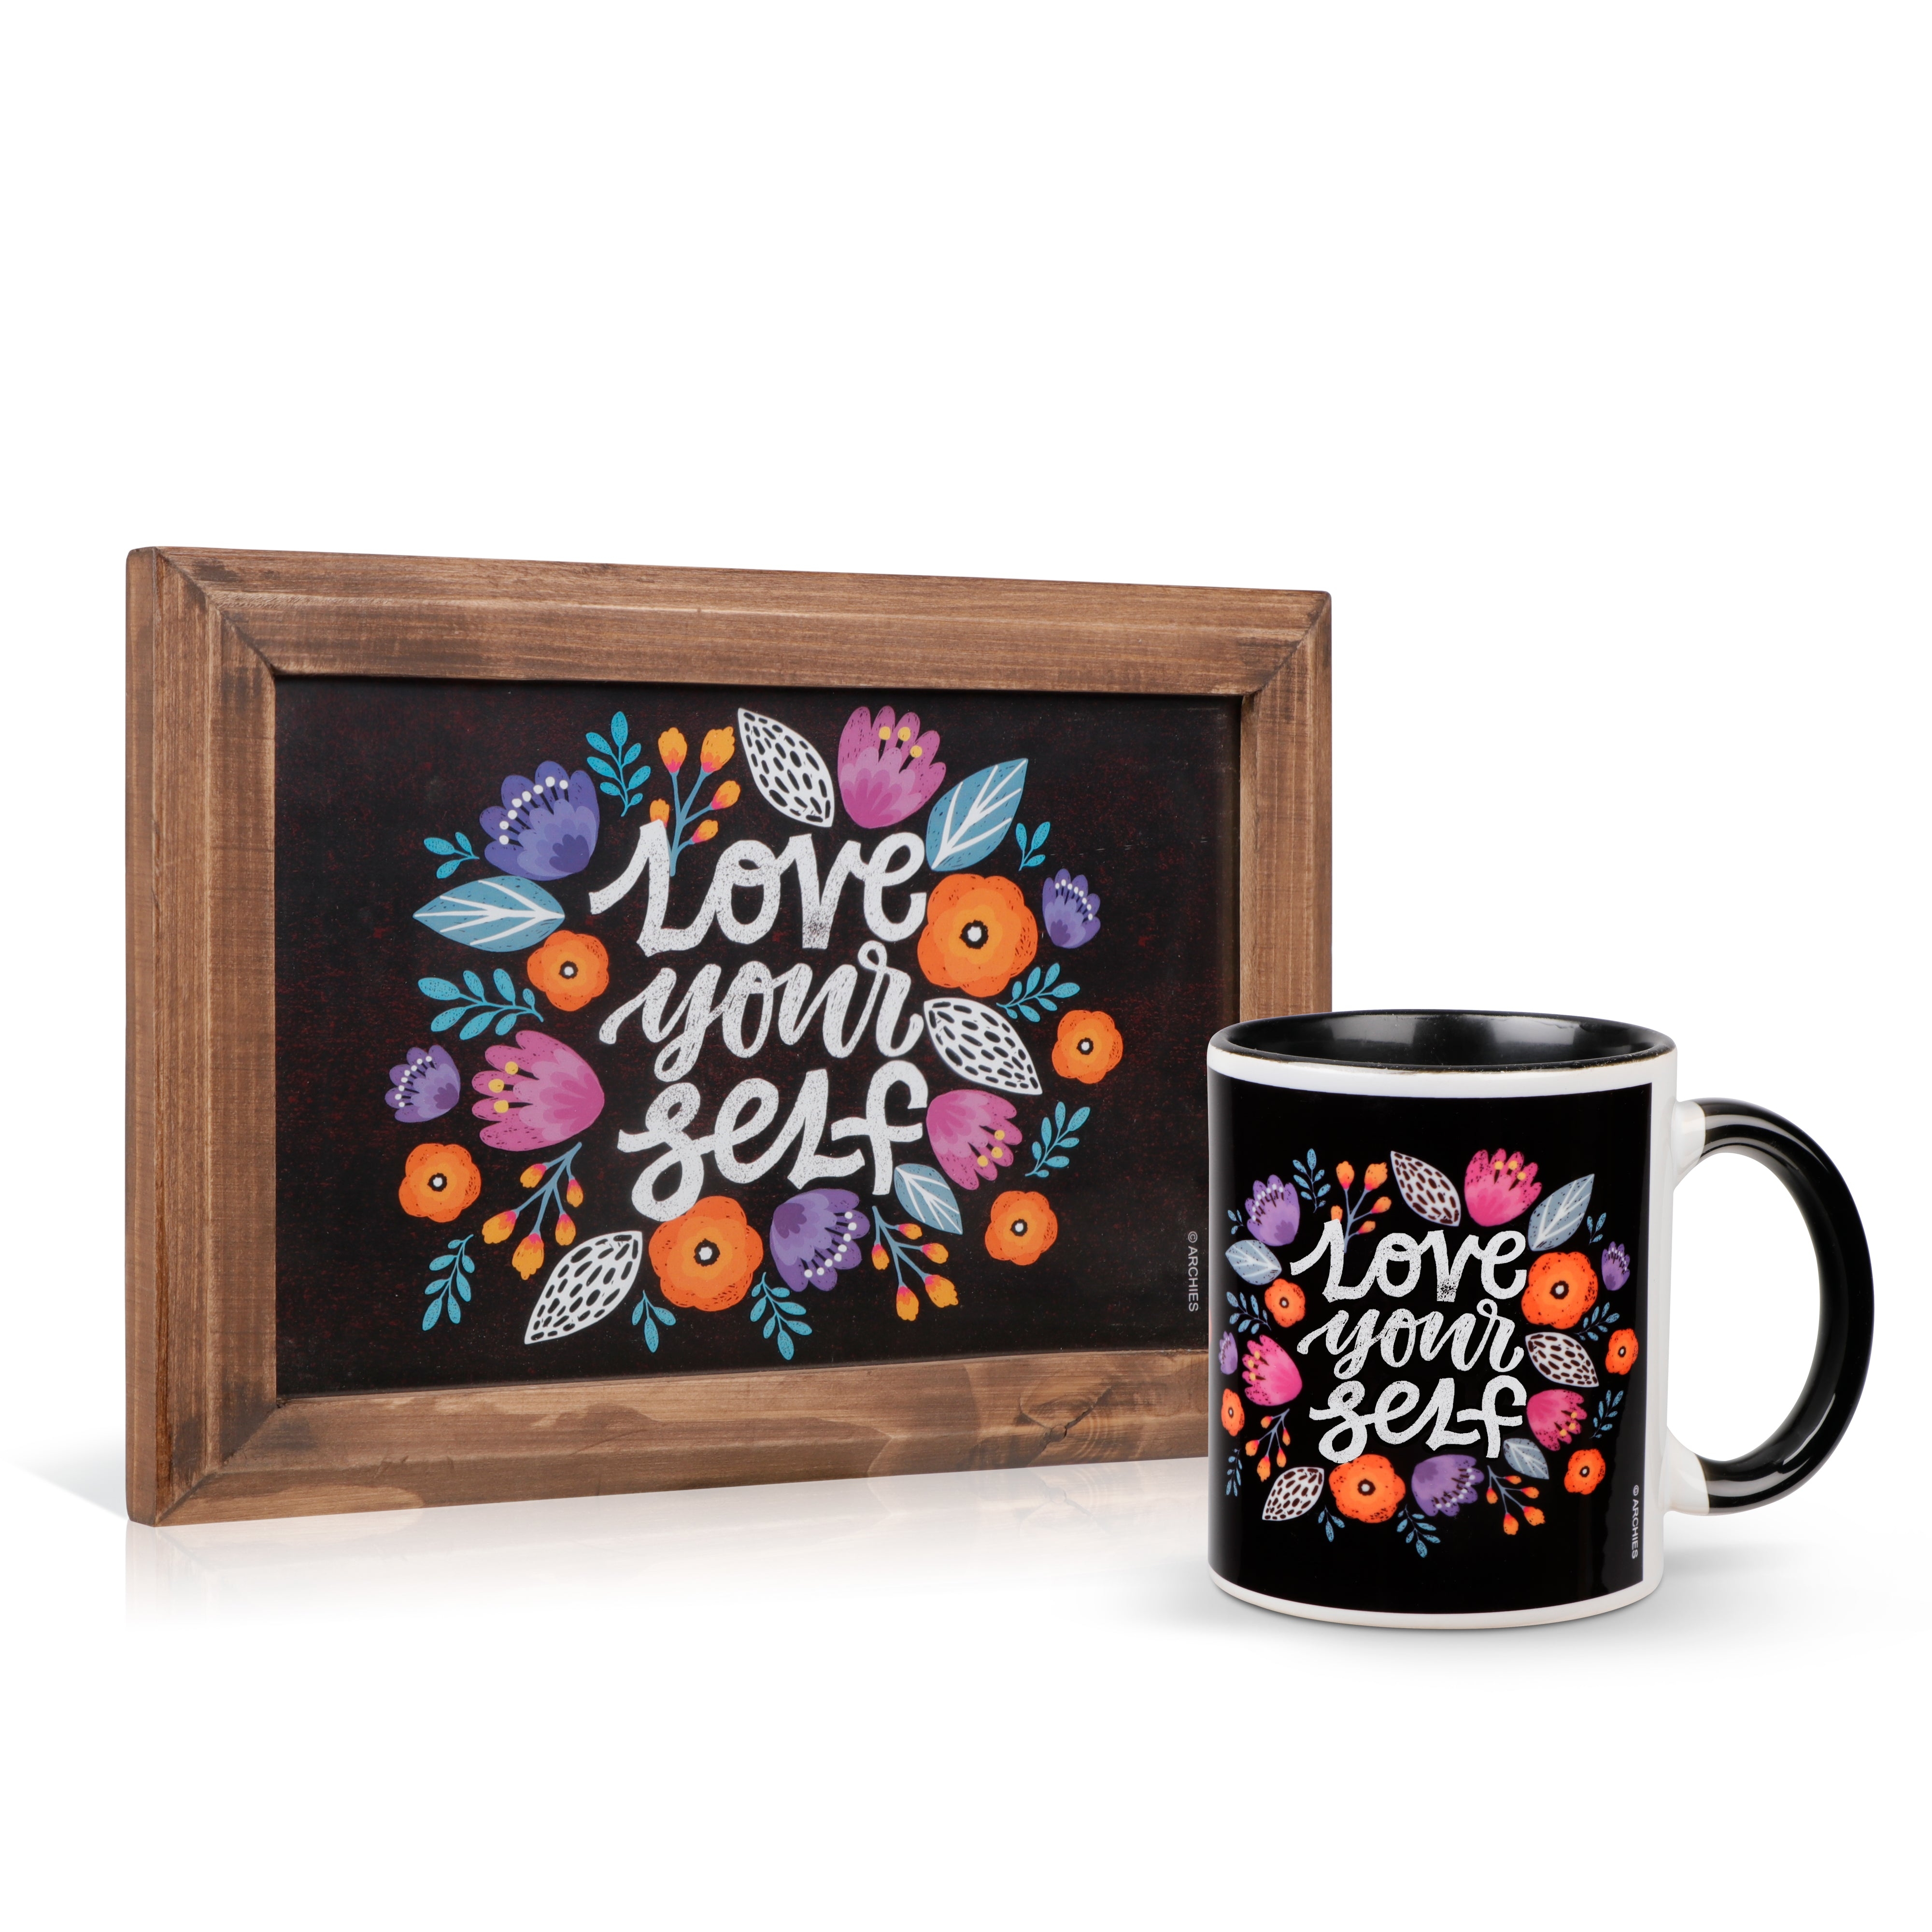 Archies KEEP SAKE Combo Gift with Ceramic Mug and Elevated Initial Quotatio- LOVE your SELF